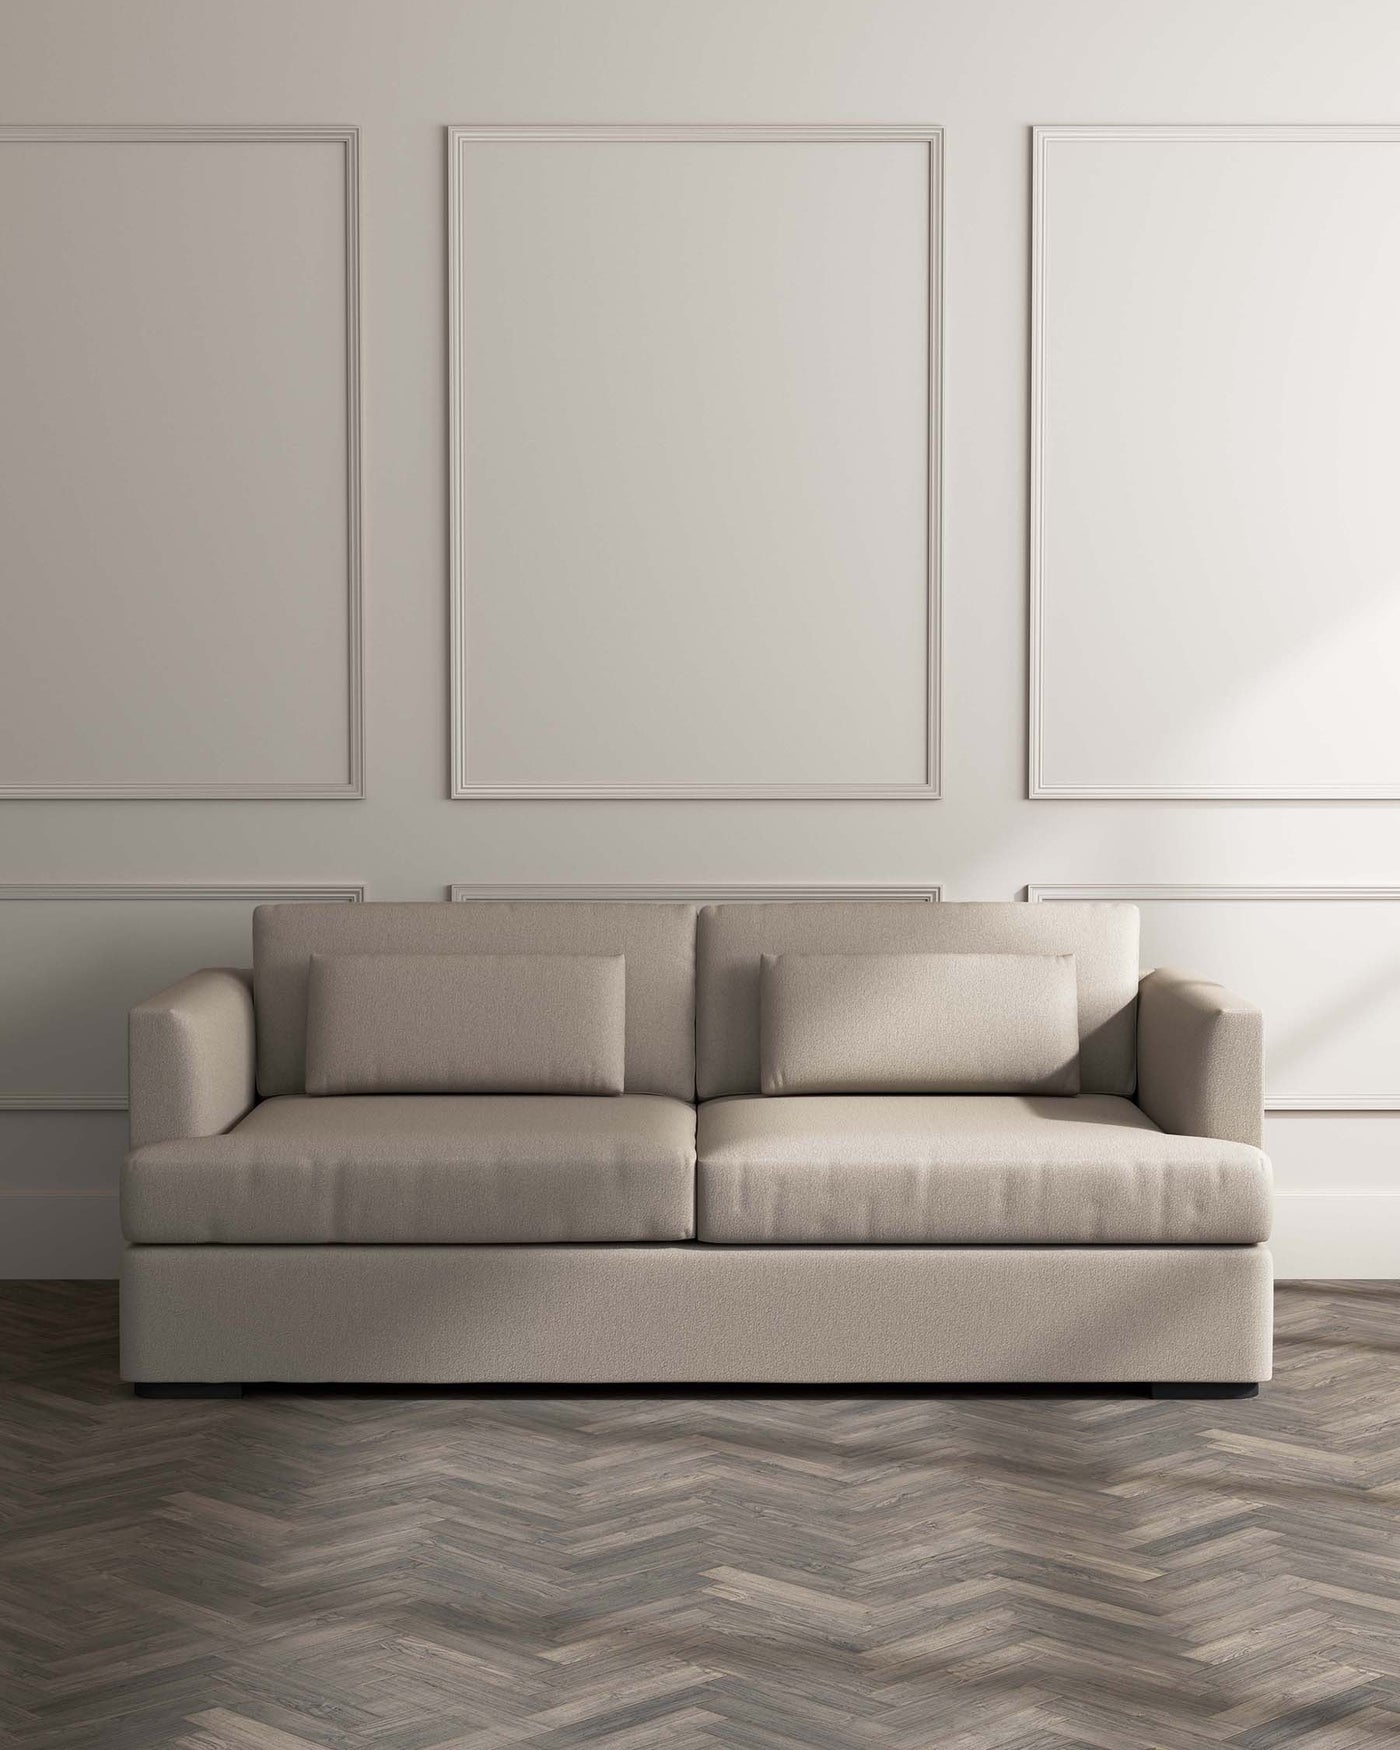 Modern three-seater sofa in a neutral beige fabric with clean lines and square armrests, set against a light grey wall with subtle panel detailing and herringbone-patterned wooden flooring.